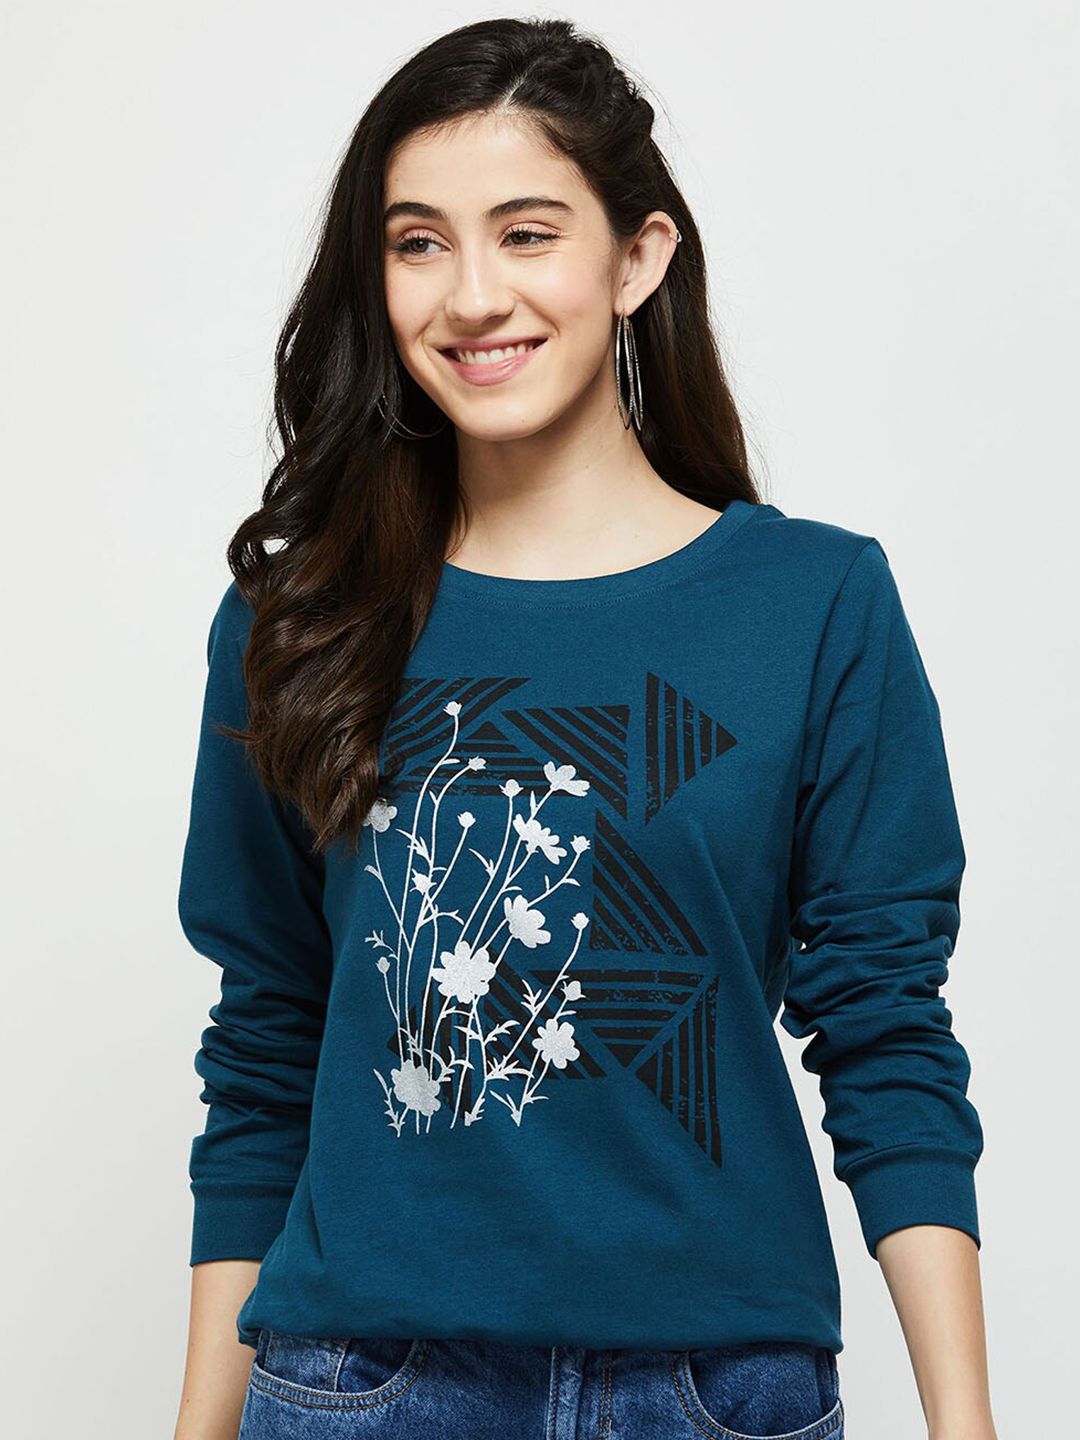 max Women Teal Printed Cotton T-shirt Price in India